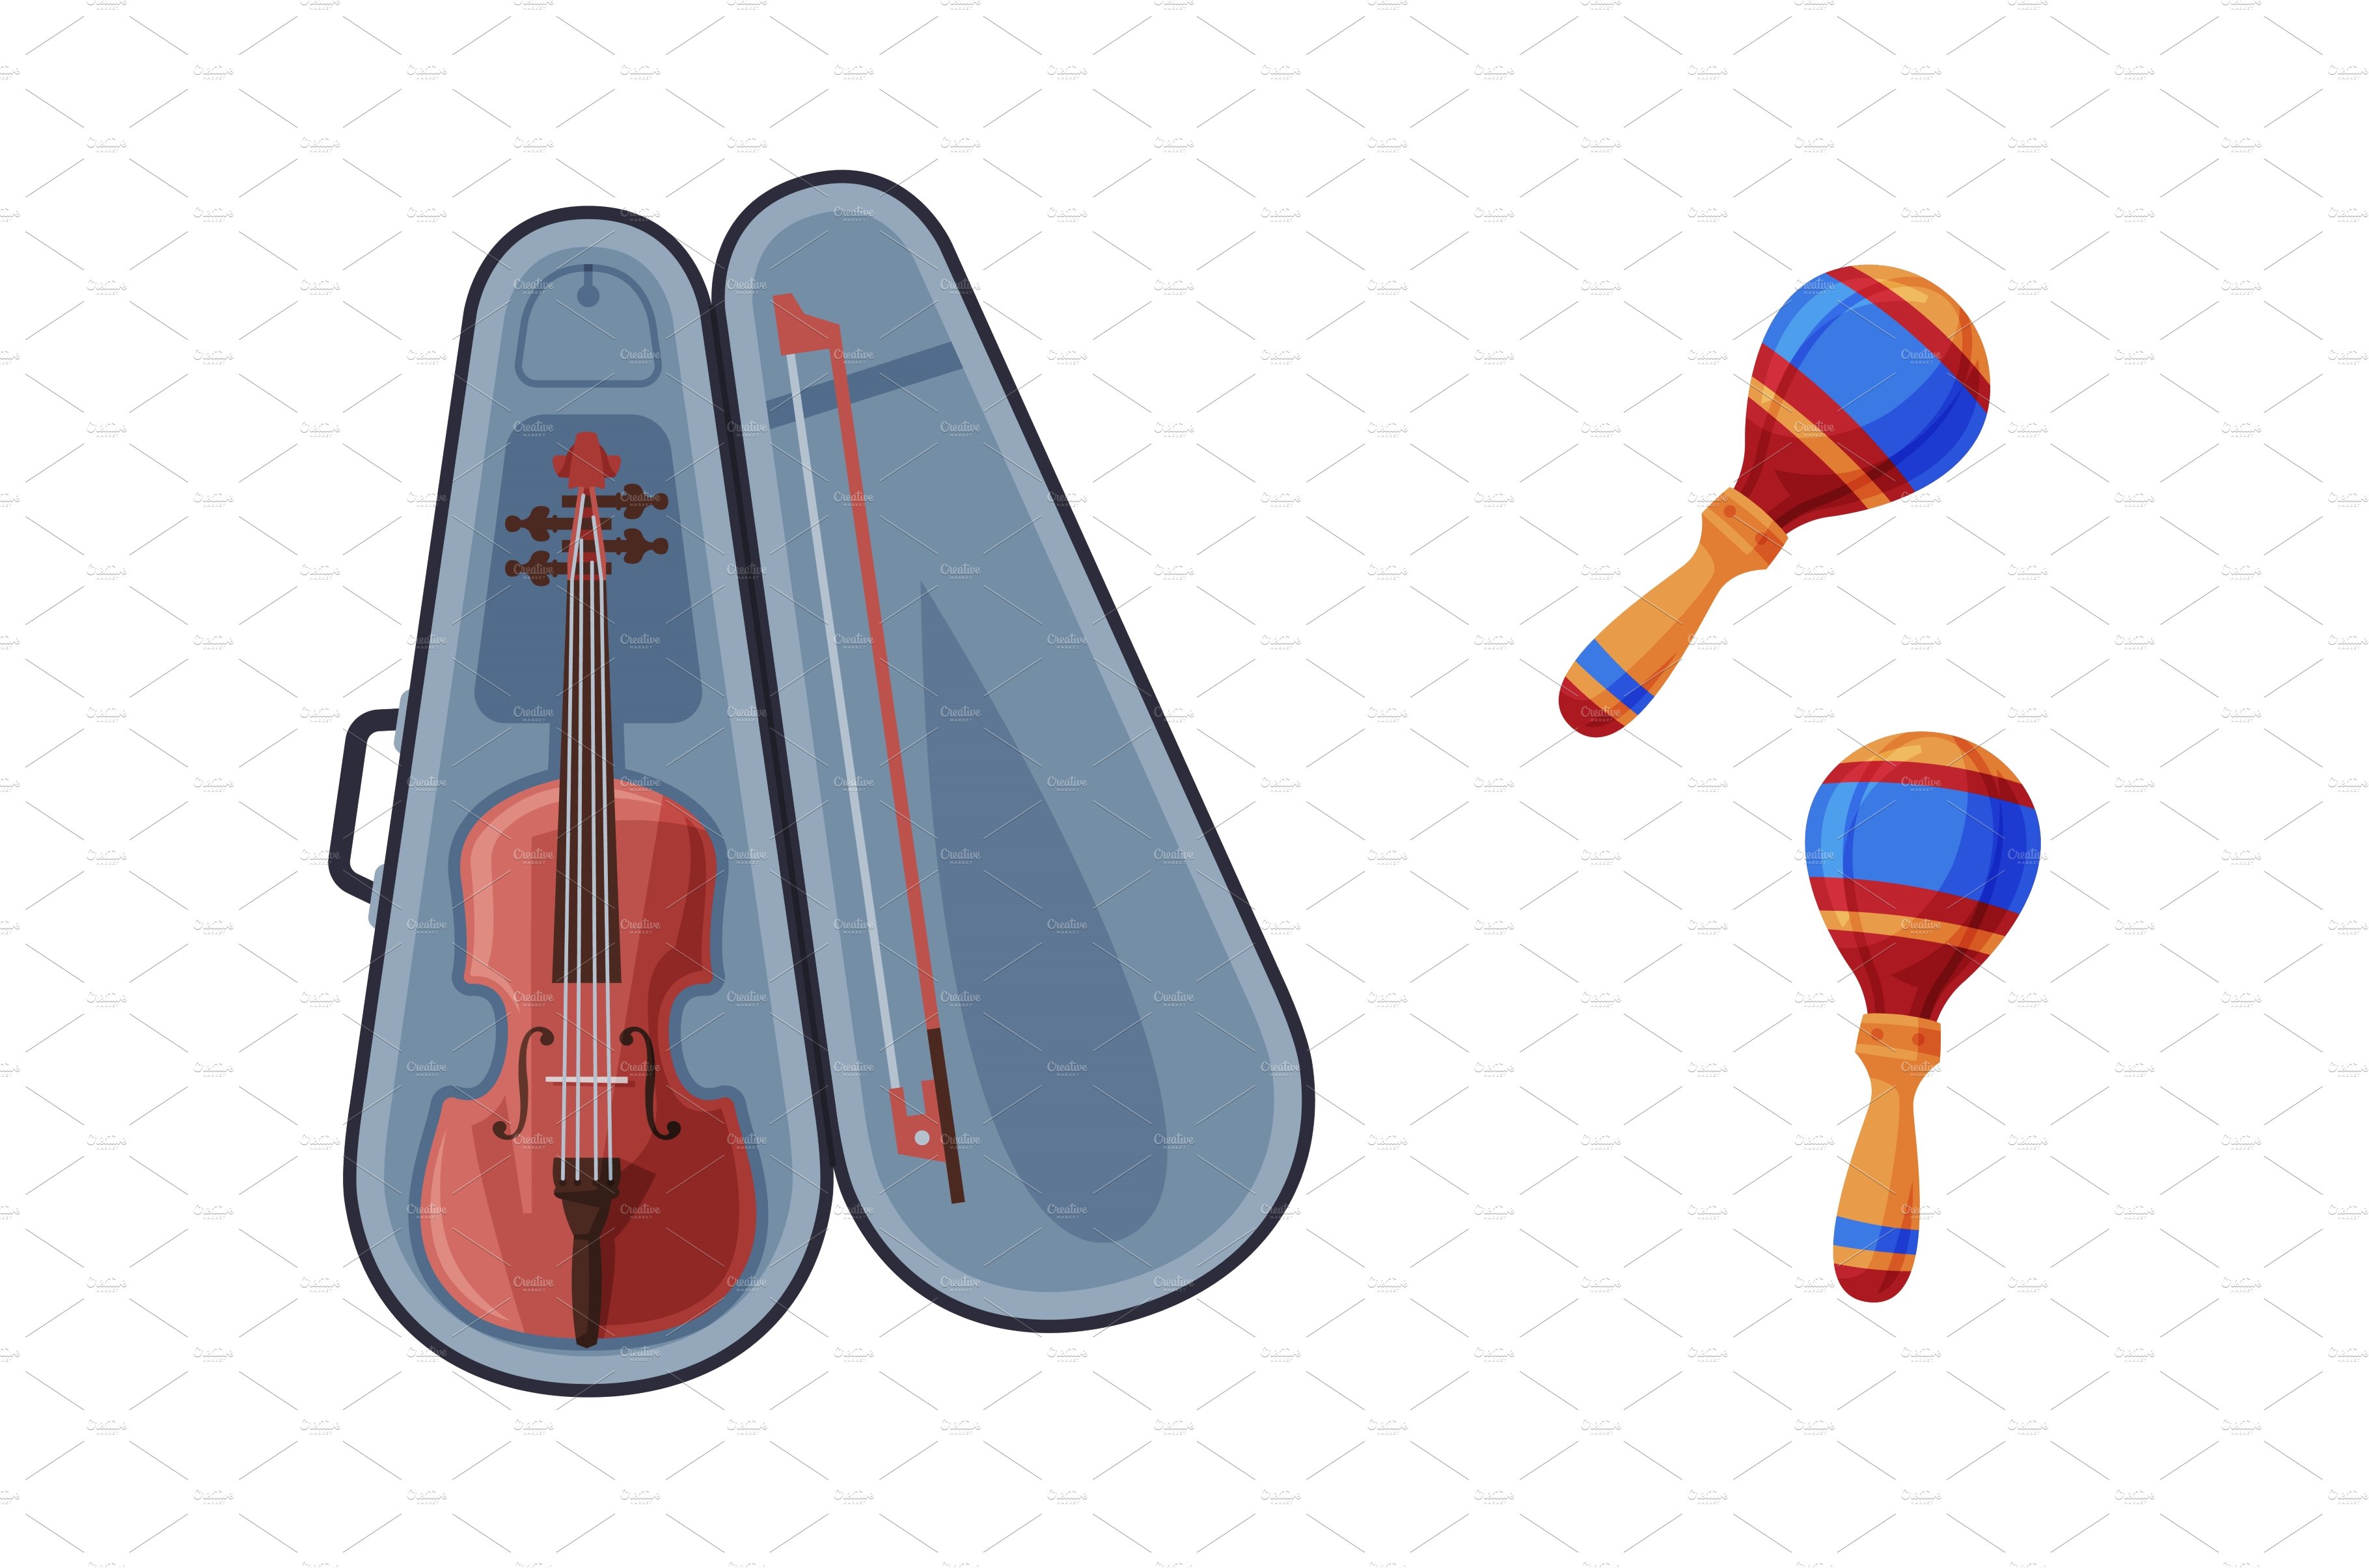 Violin in Case and Maraca as cover image.